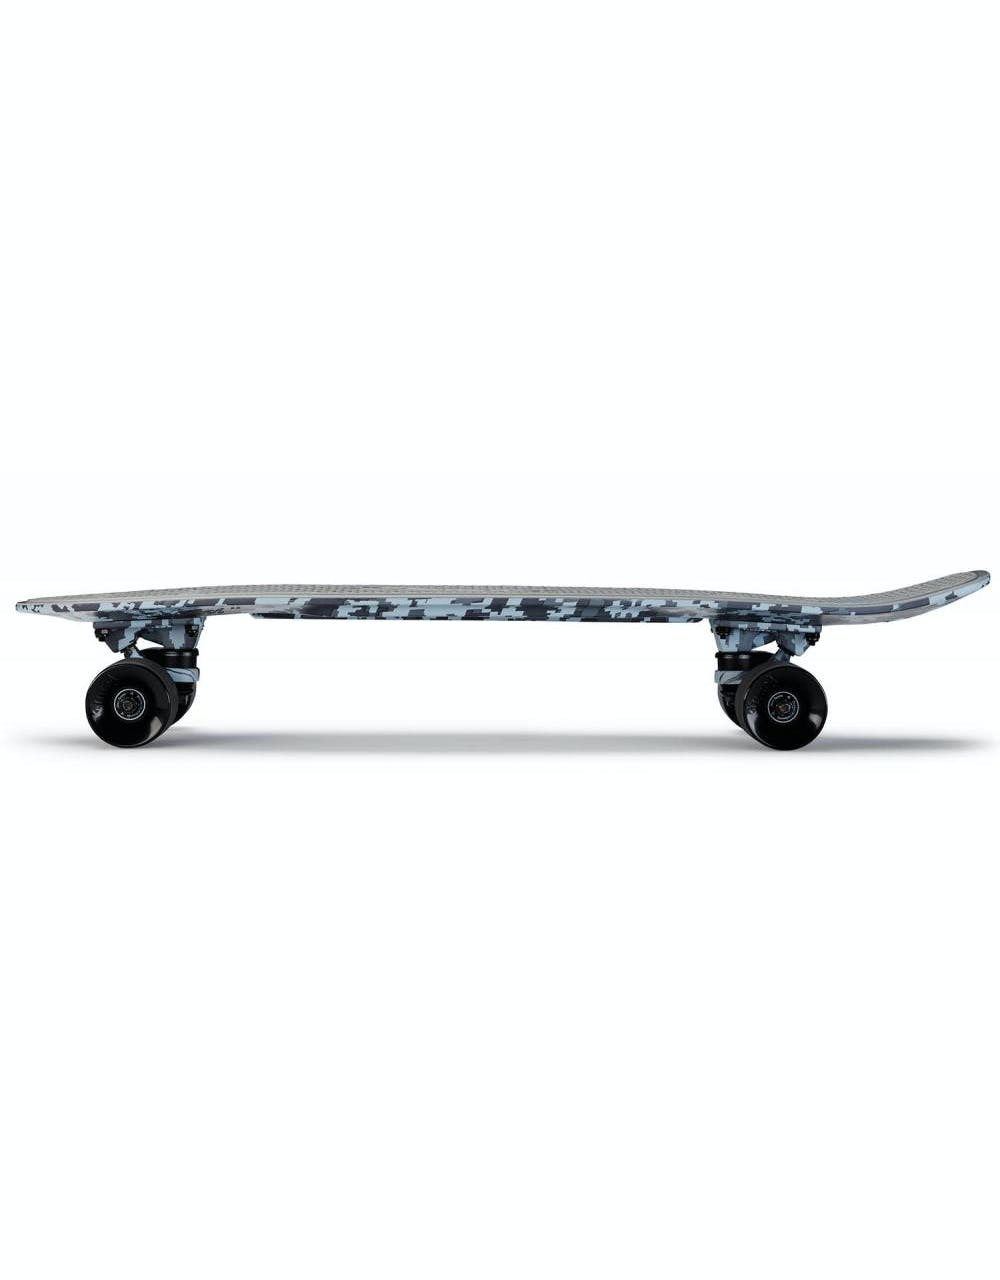 Penny Skateboards Classic Nickel Cruiser - 27" - Special Ops